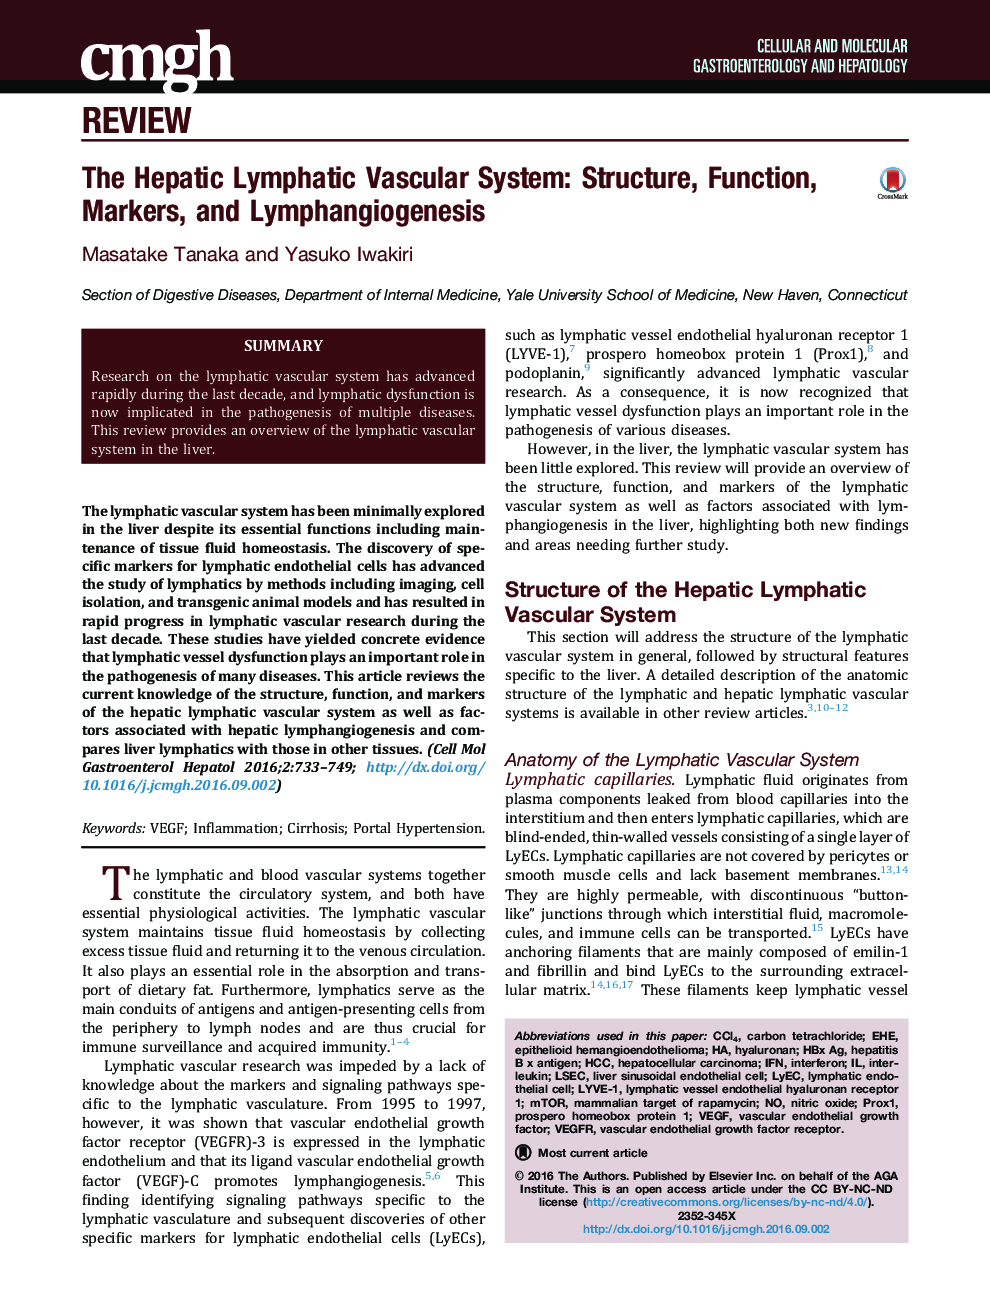 The Hepatic Lymphatic Vascular System: Structure, Function, Markers, and Lymphangiogenesis